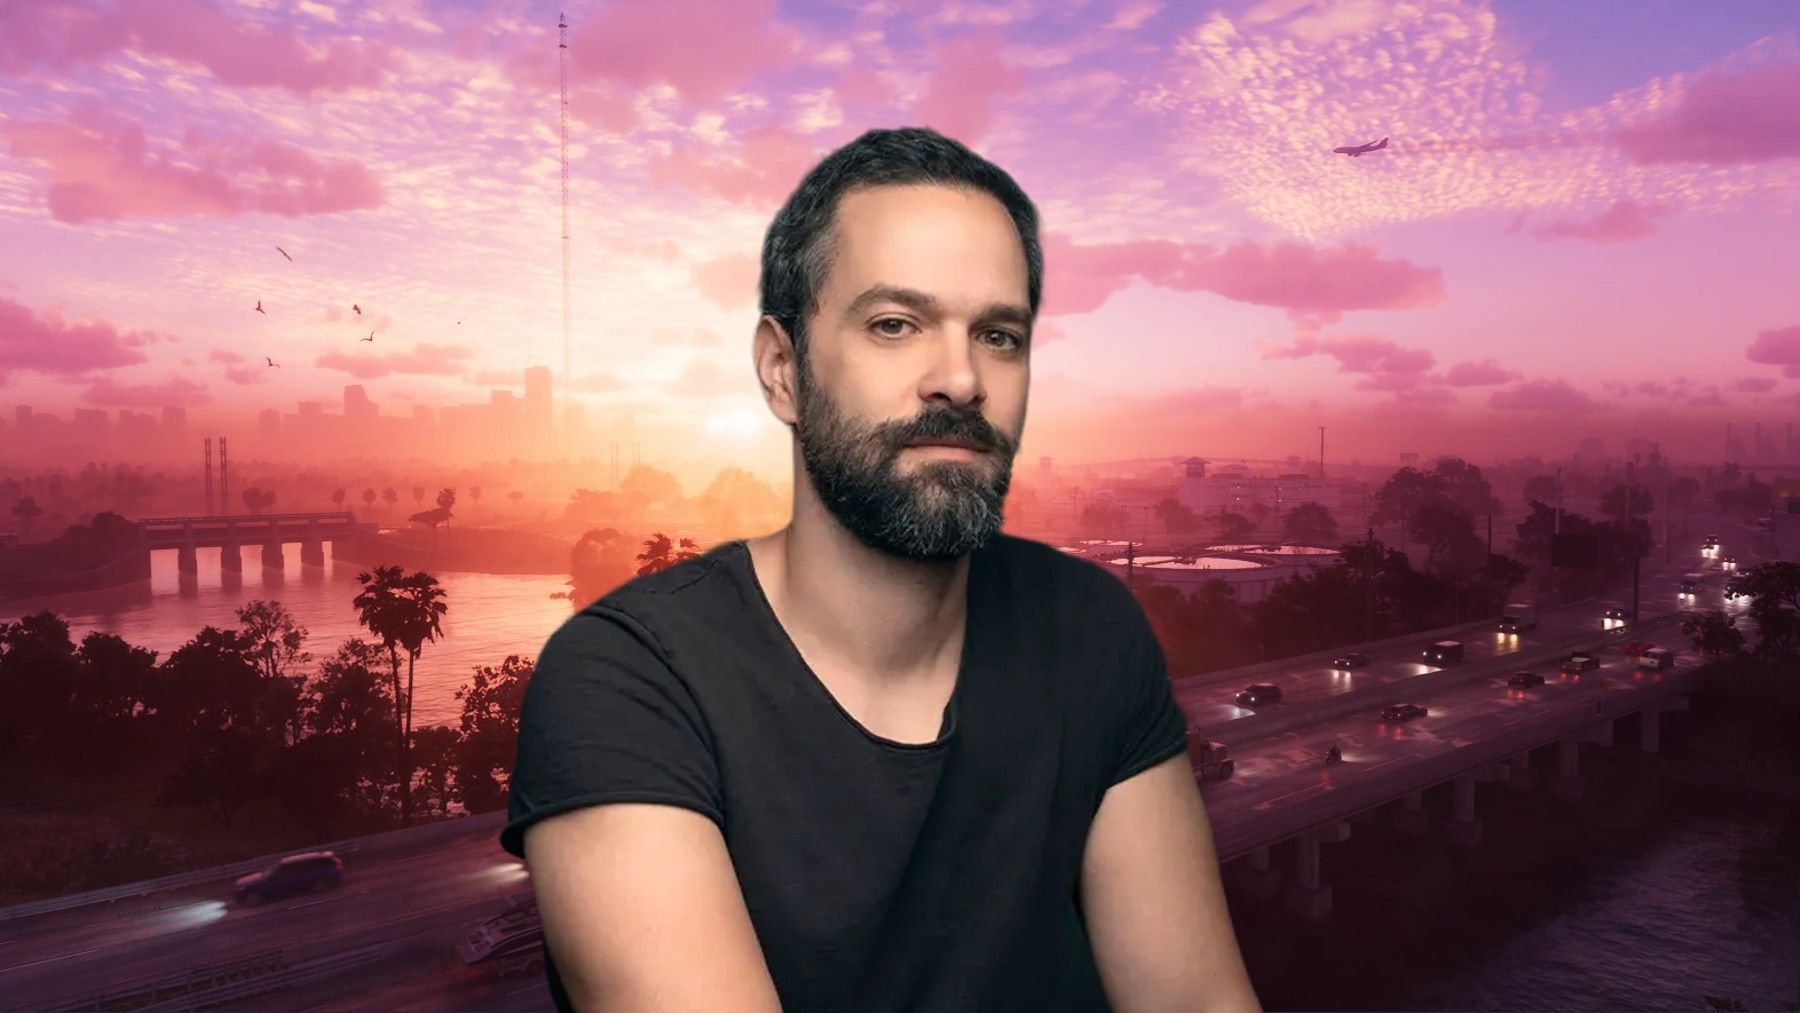 Message from Neil Druckmann [From Naughty Dogs] after the recent GTA  leaks..They themselves face leaks on Last of Us Part 2.. : r/IndianGaming